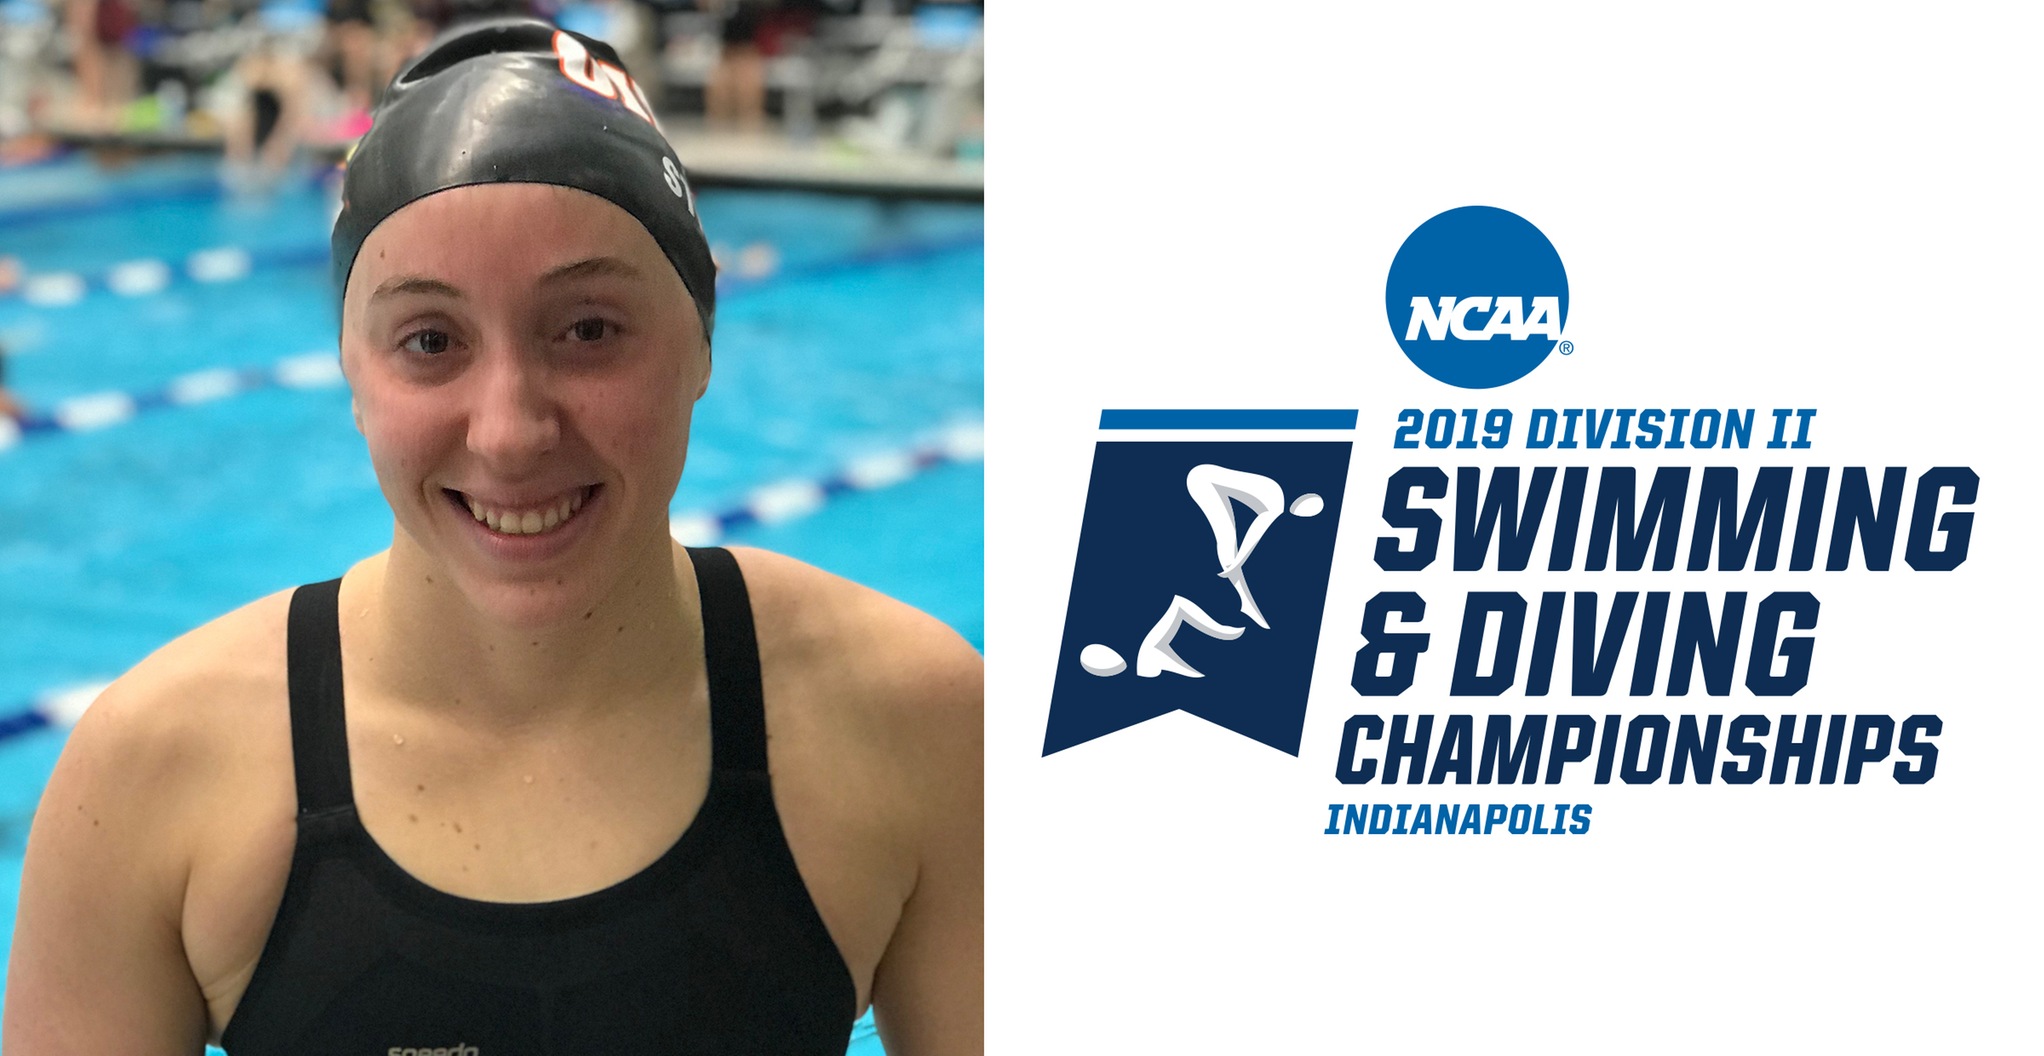 Stiegal Breaks School Record in 100-yard Freestyle at National Championships